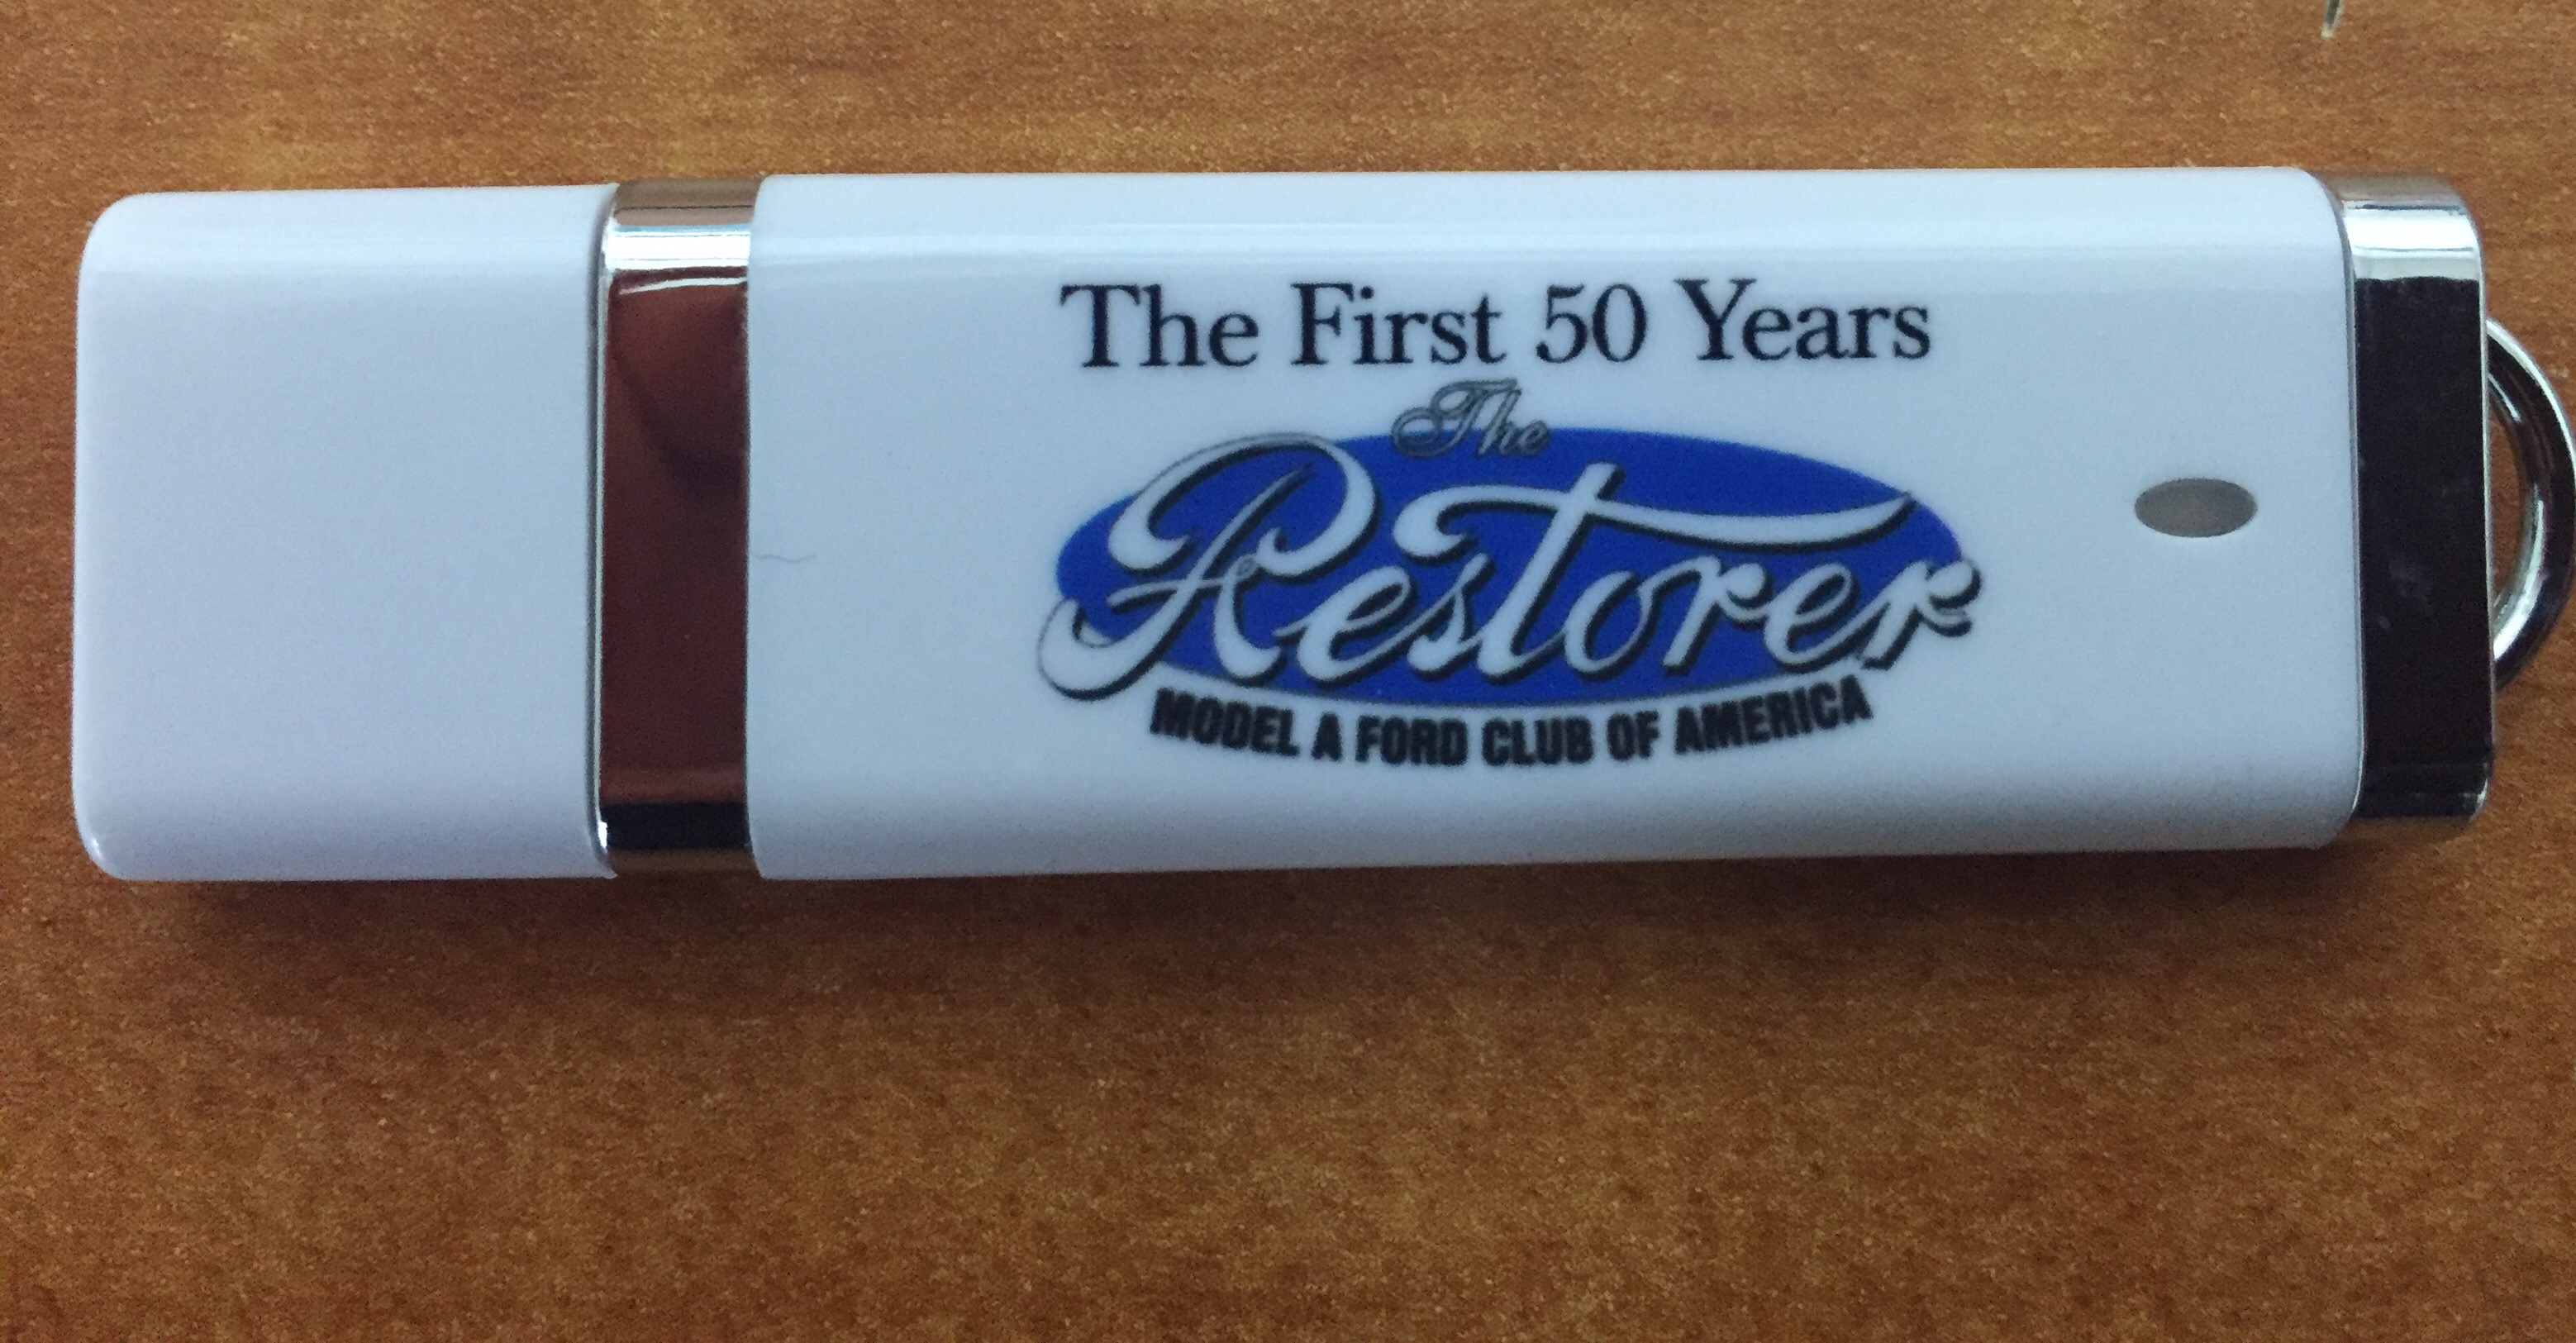 First 50 Years of The Restorer Magazine - Flash Drive